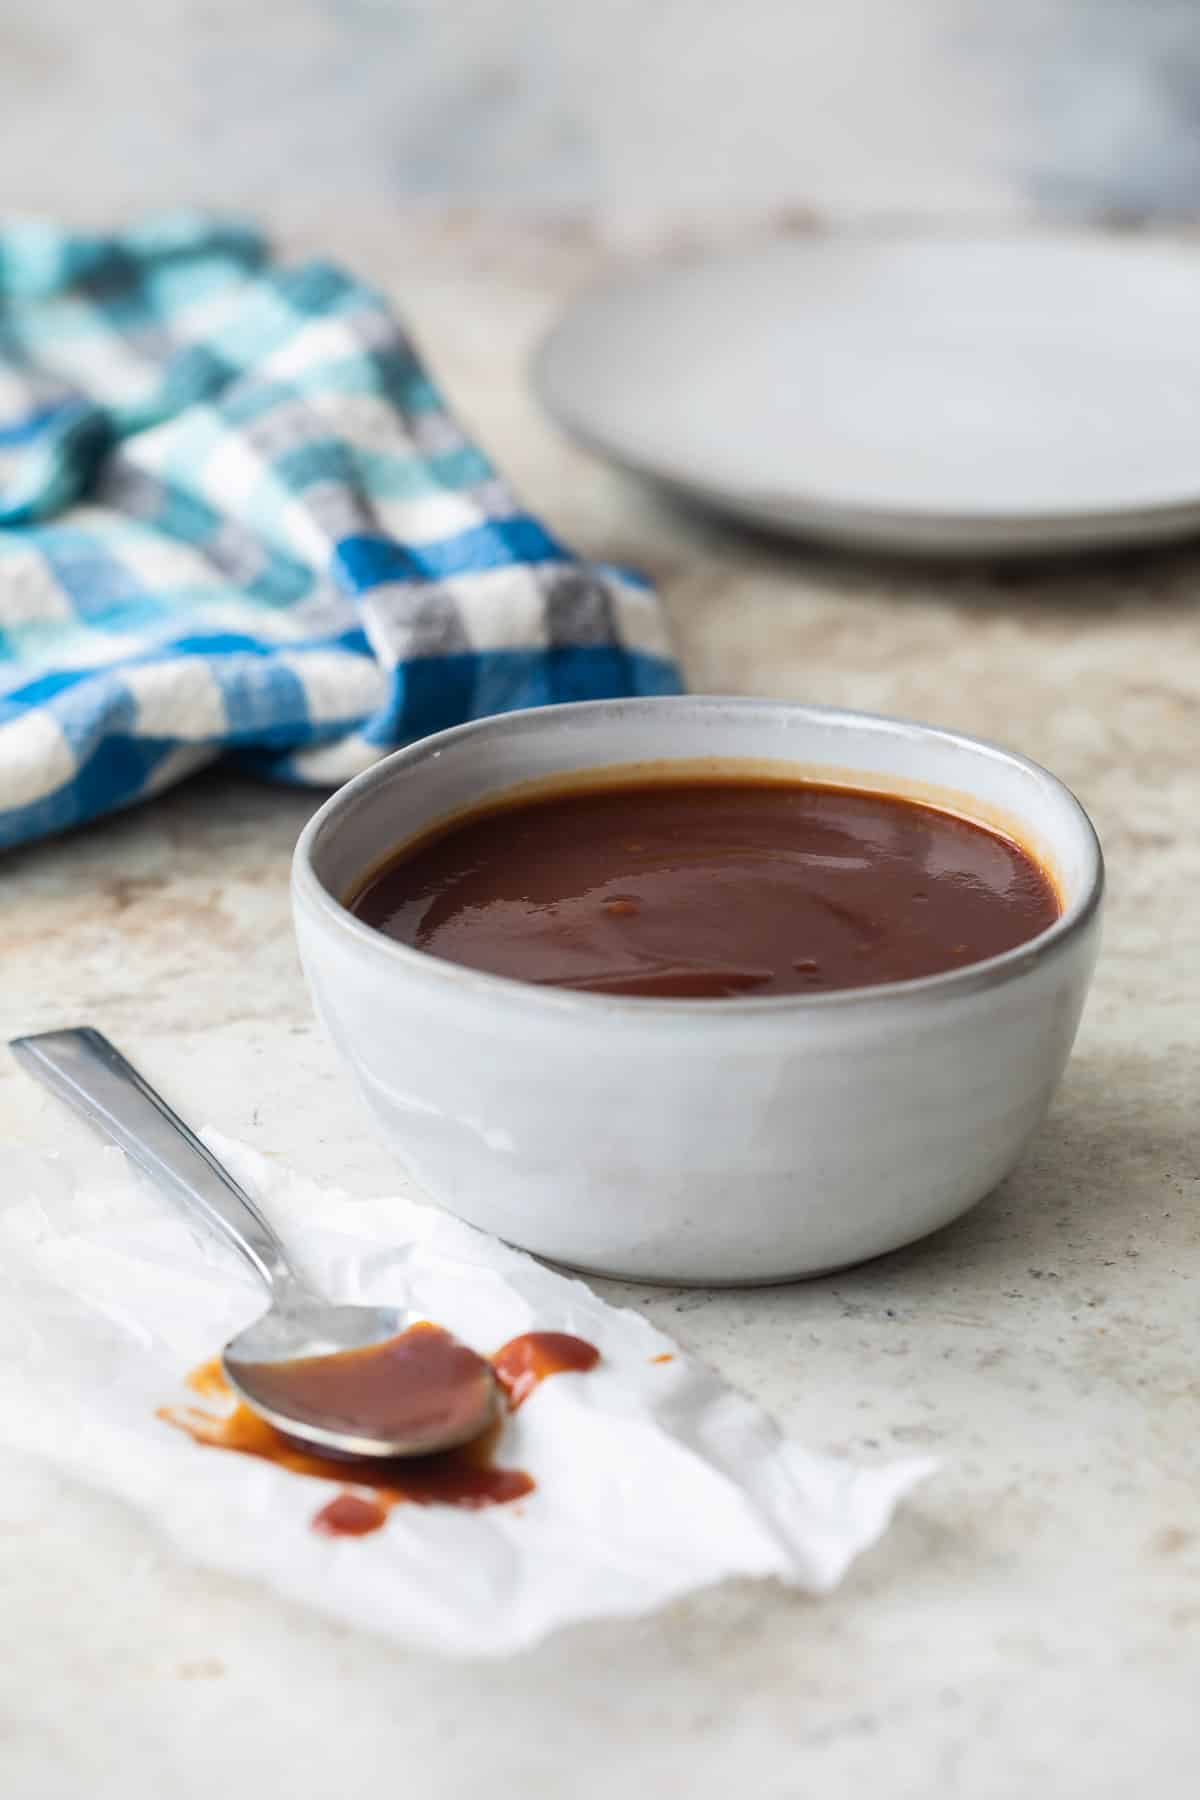 A bowl of barbecue sauce with a spoon resting next to it.